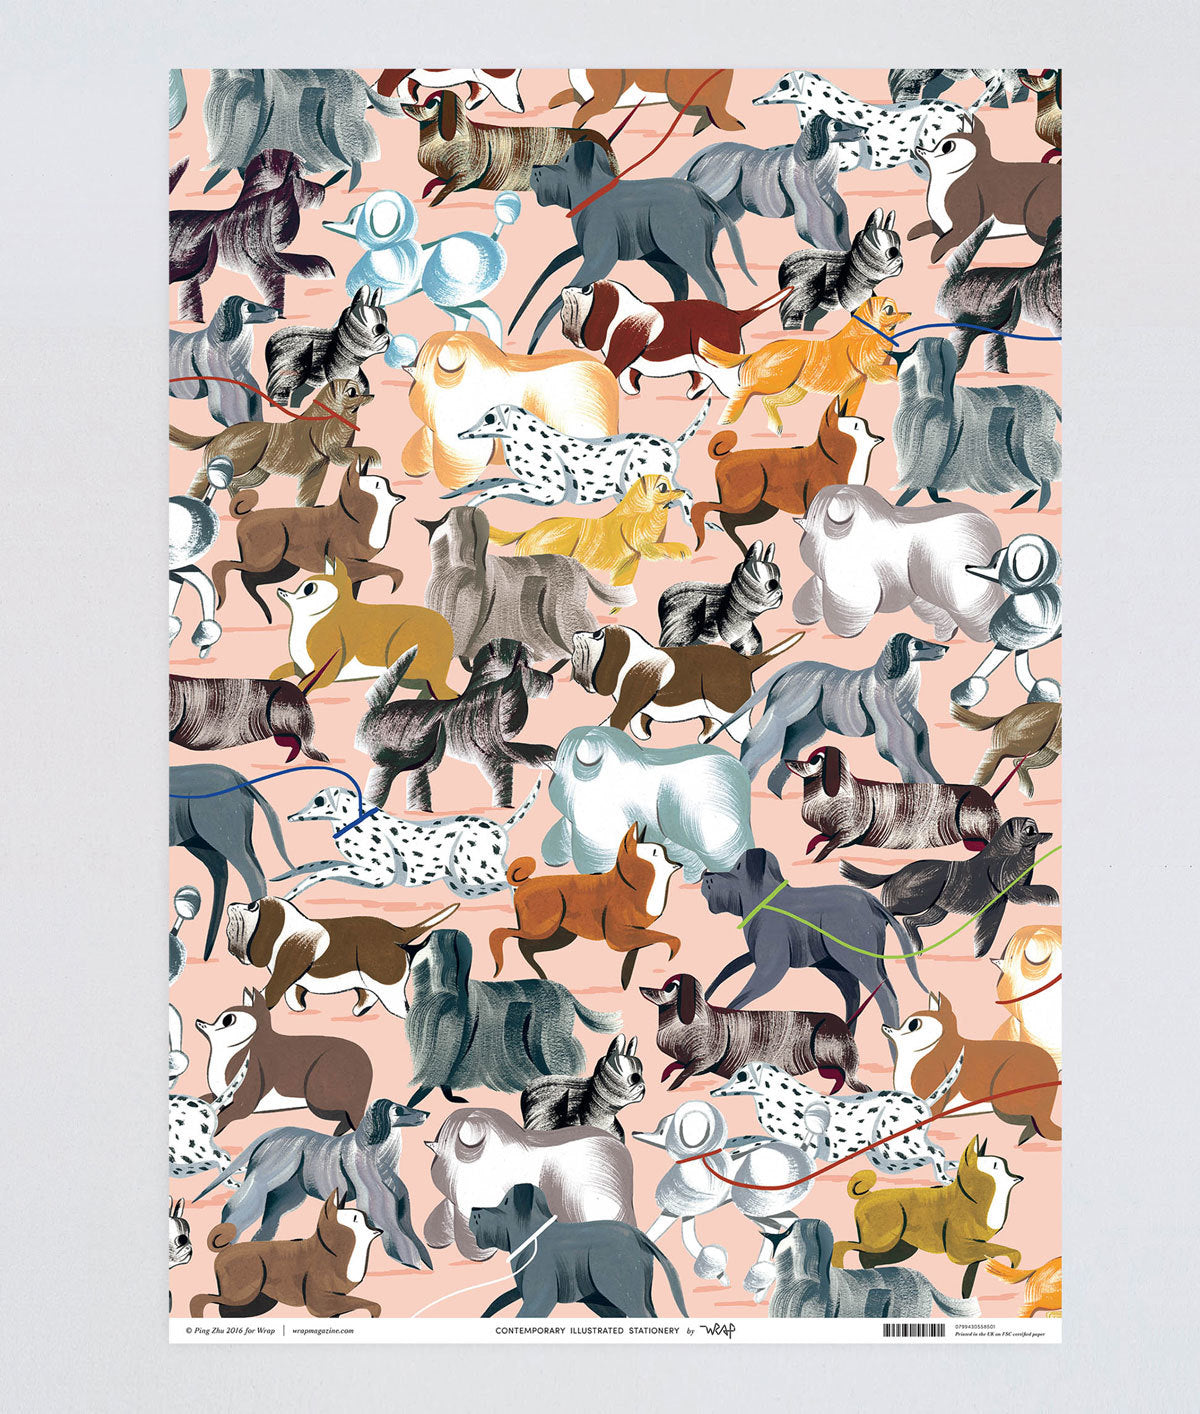 City dogs wrapping paper